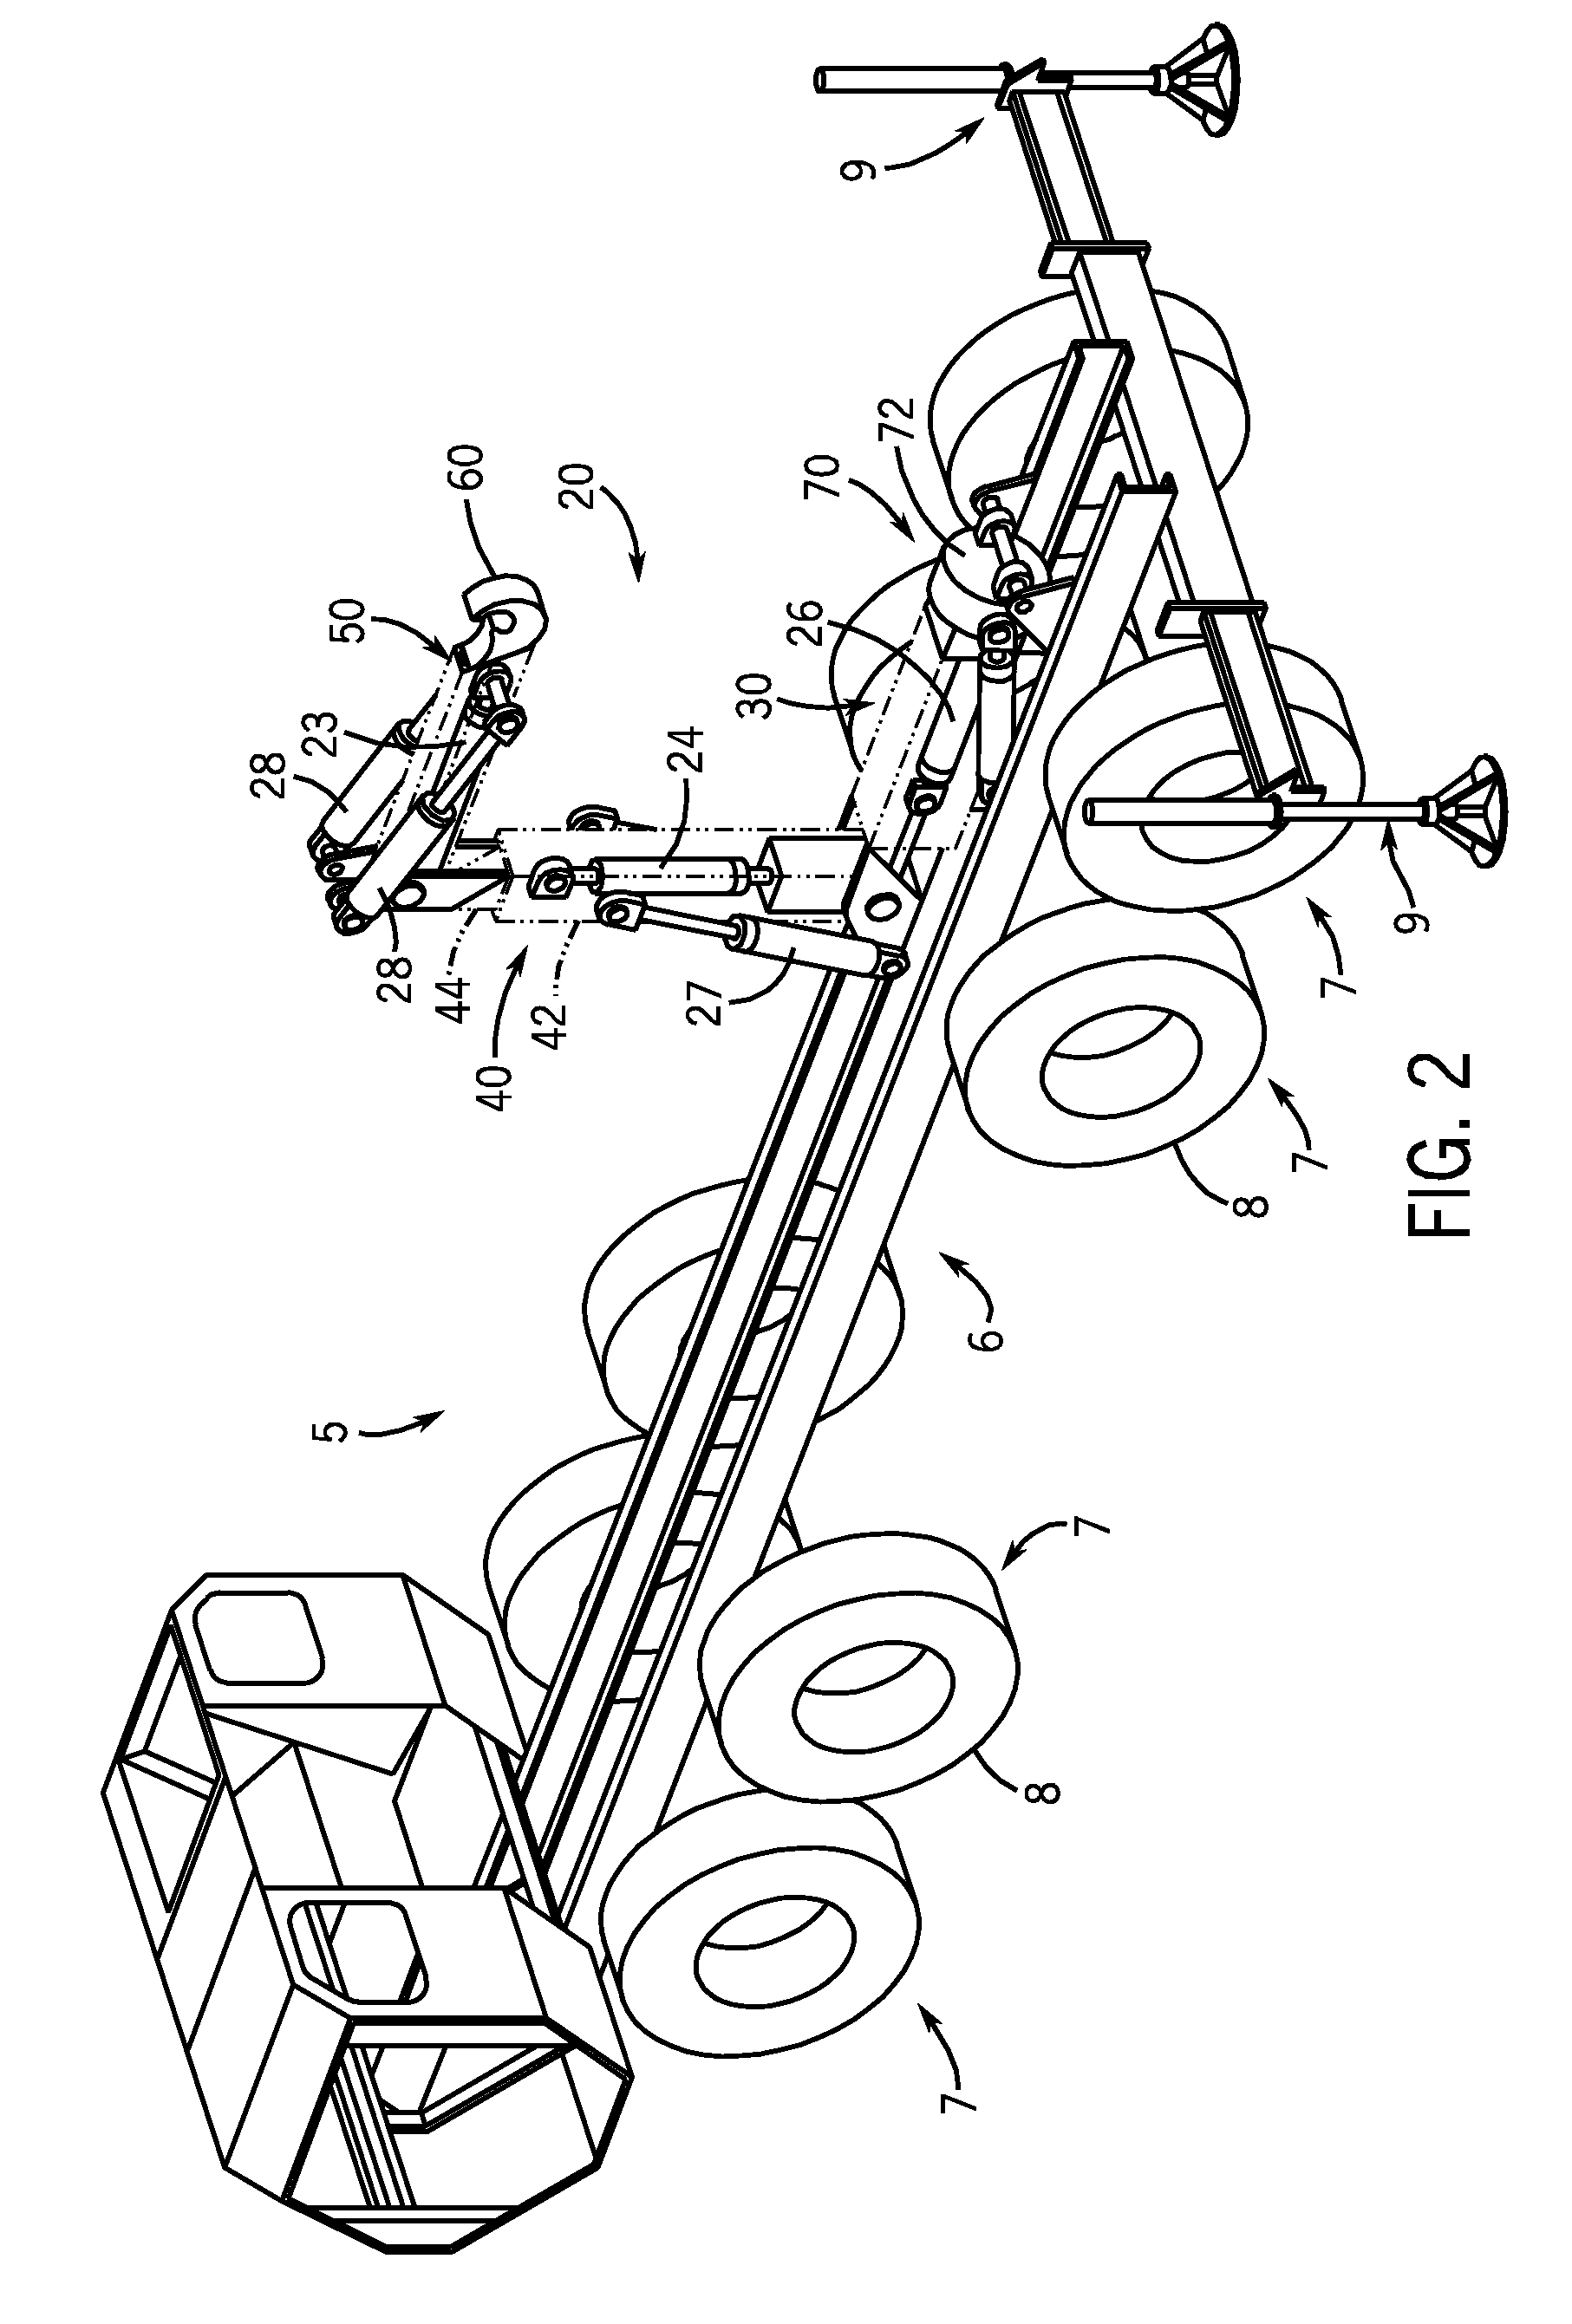 Rotatable and articulated material handling apparatus